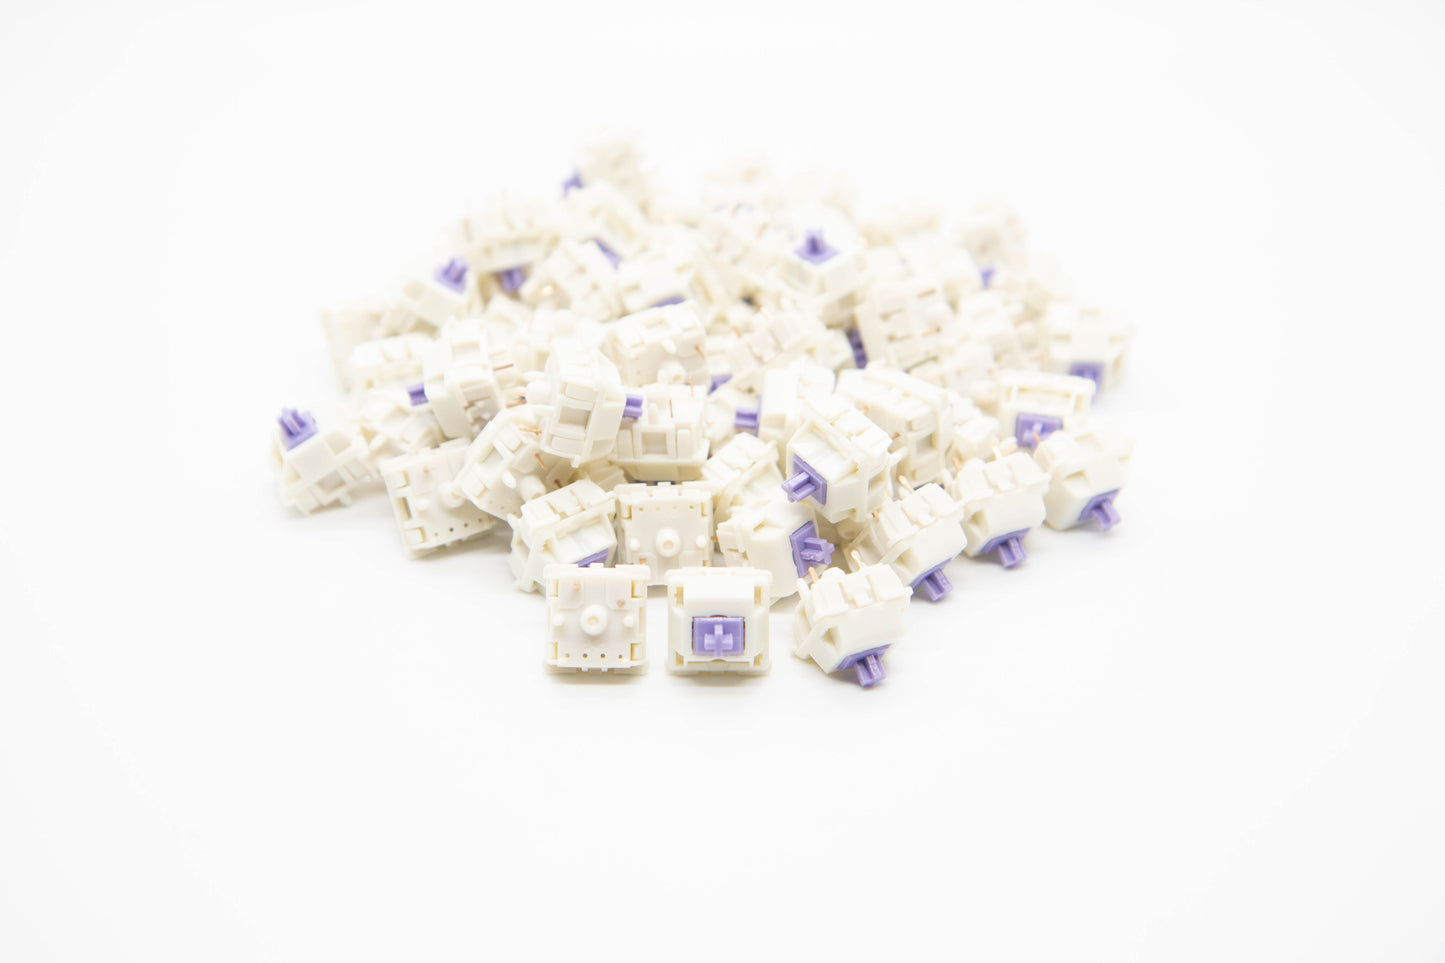 Close-up shot of a pile of SP-Star Polaris Purple mechanical keyboard switches featuring white housing and purple stems